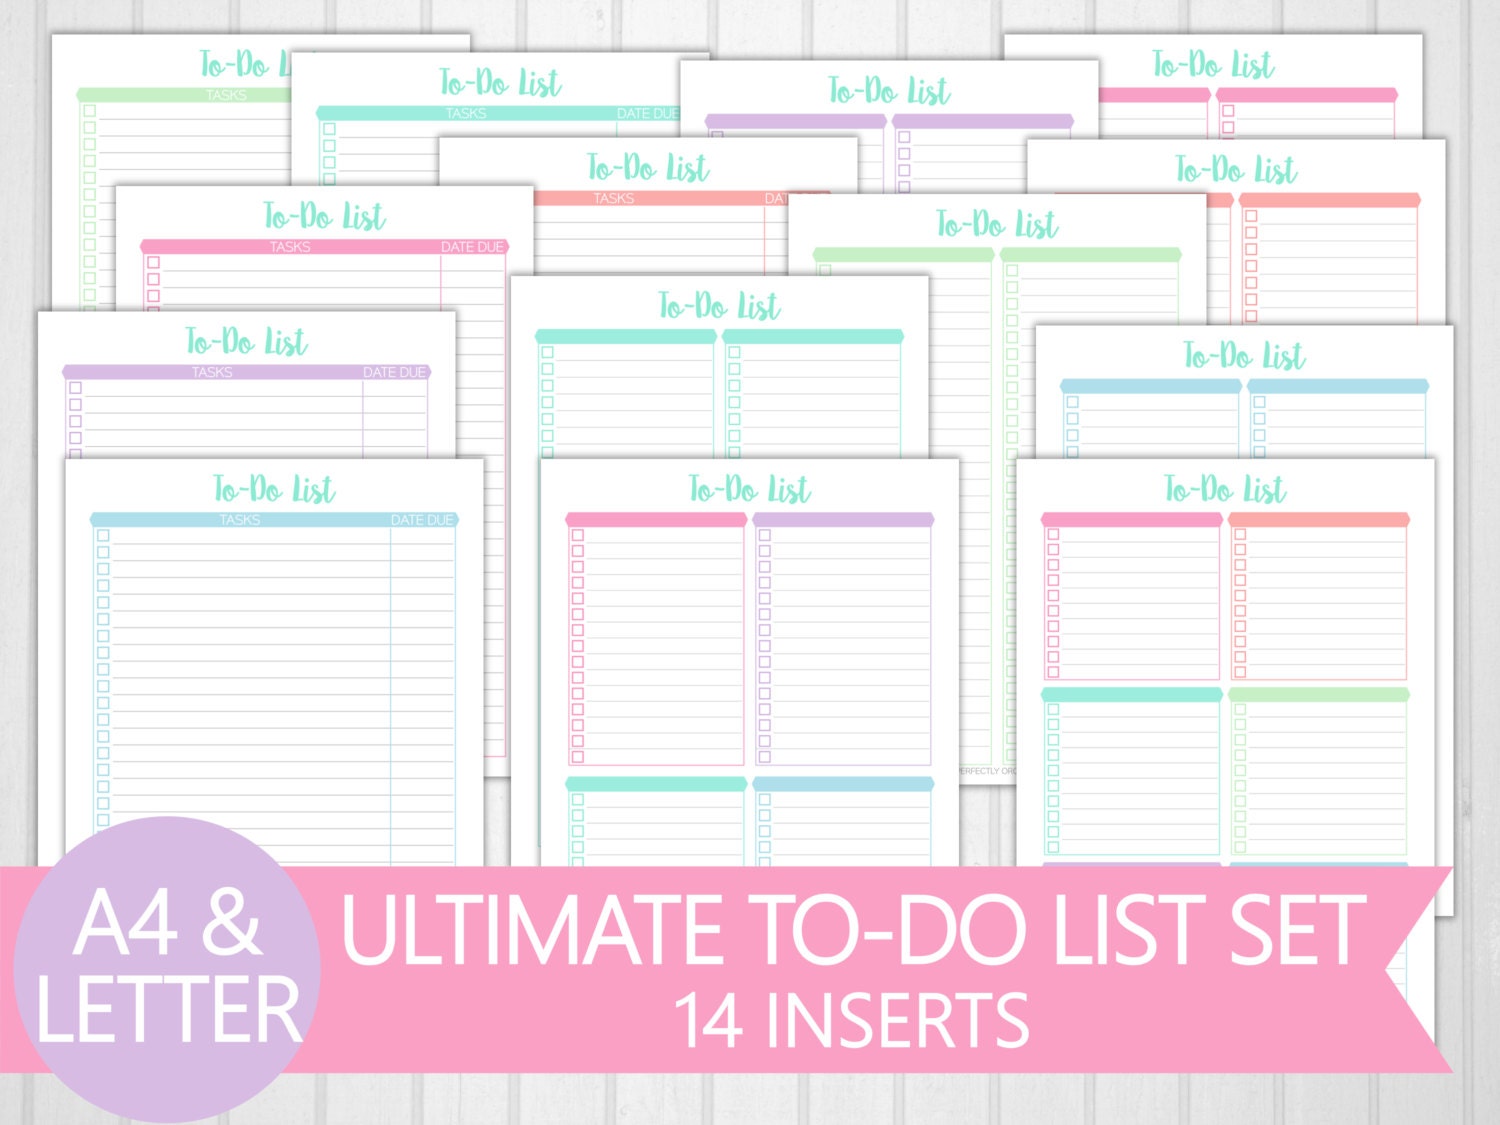 Letter & A4 To-Do List Set Printable 14 by PerfectlyOrganised